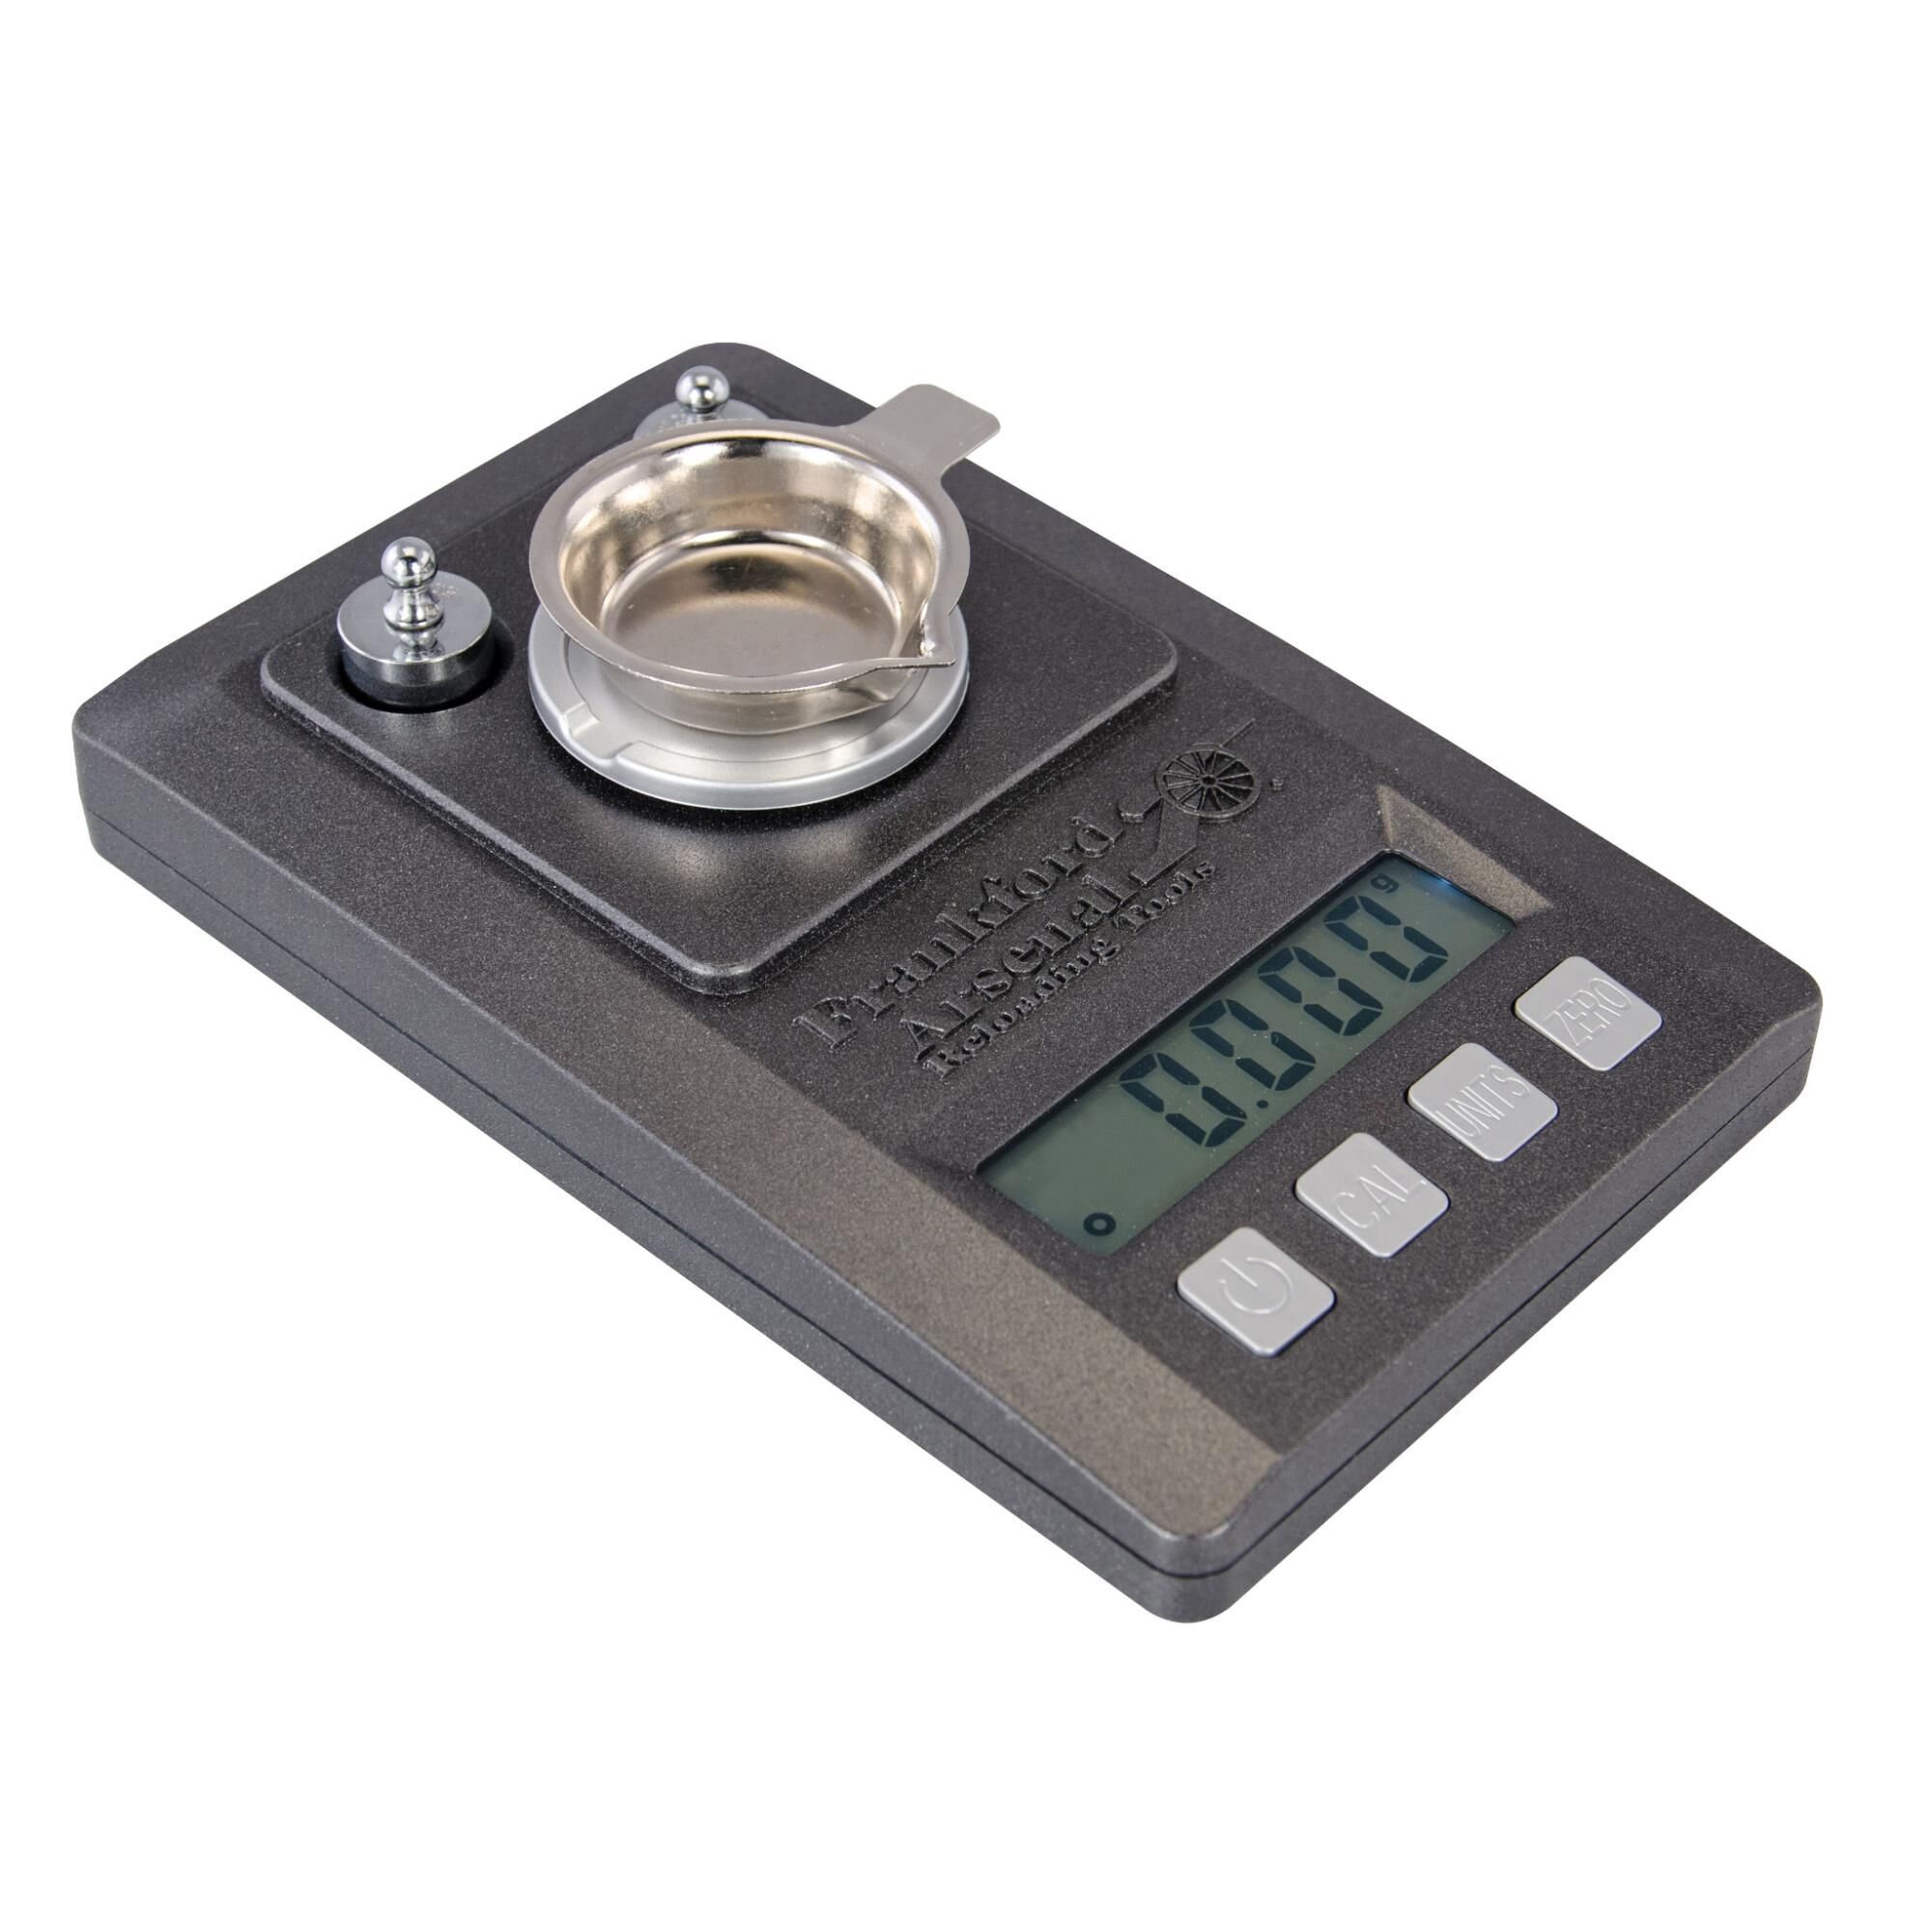 Frankford Plantinum Series Precision Scale with Case